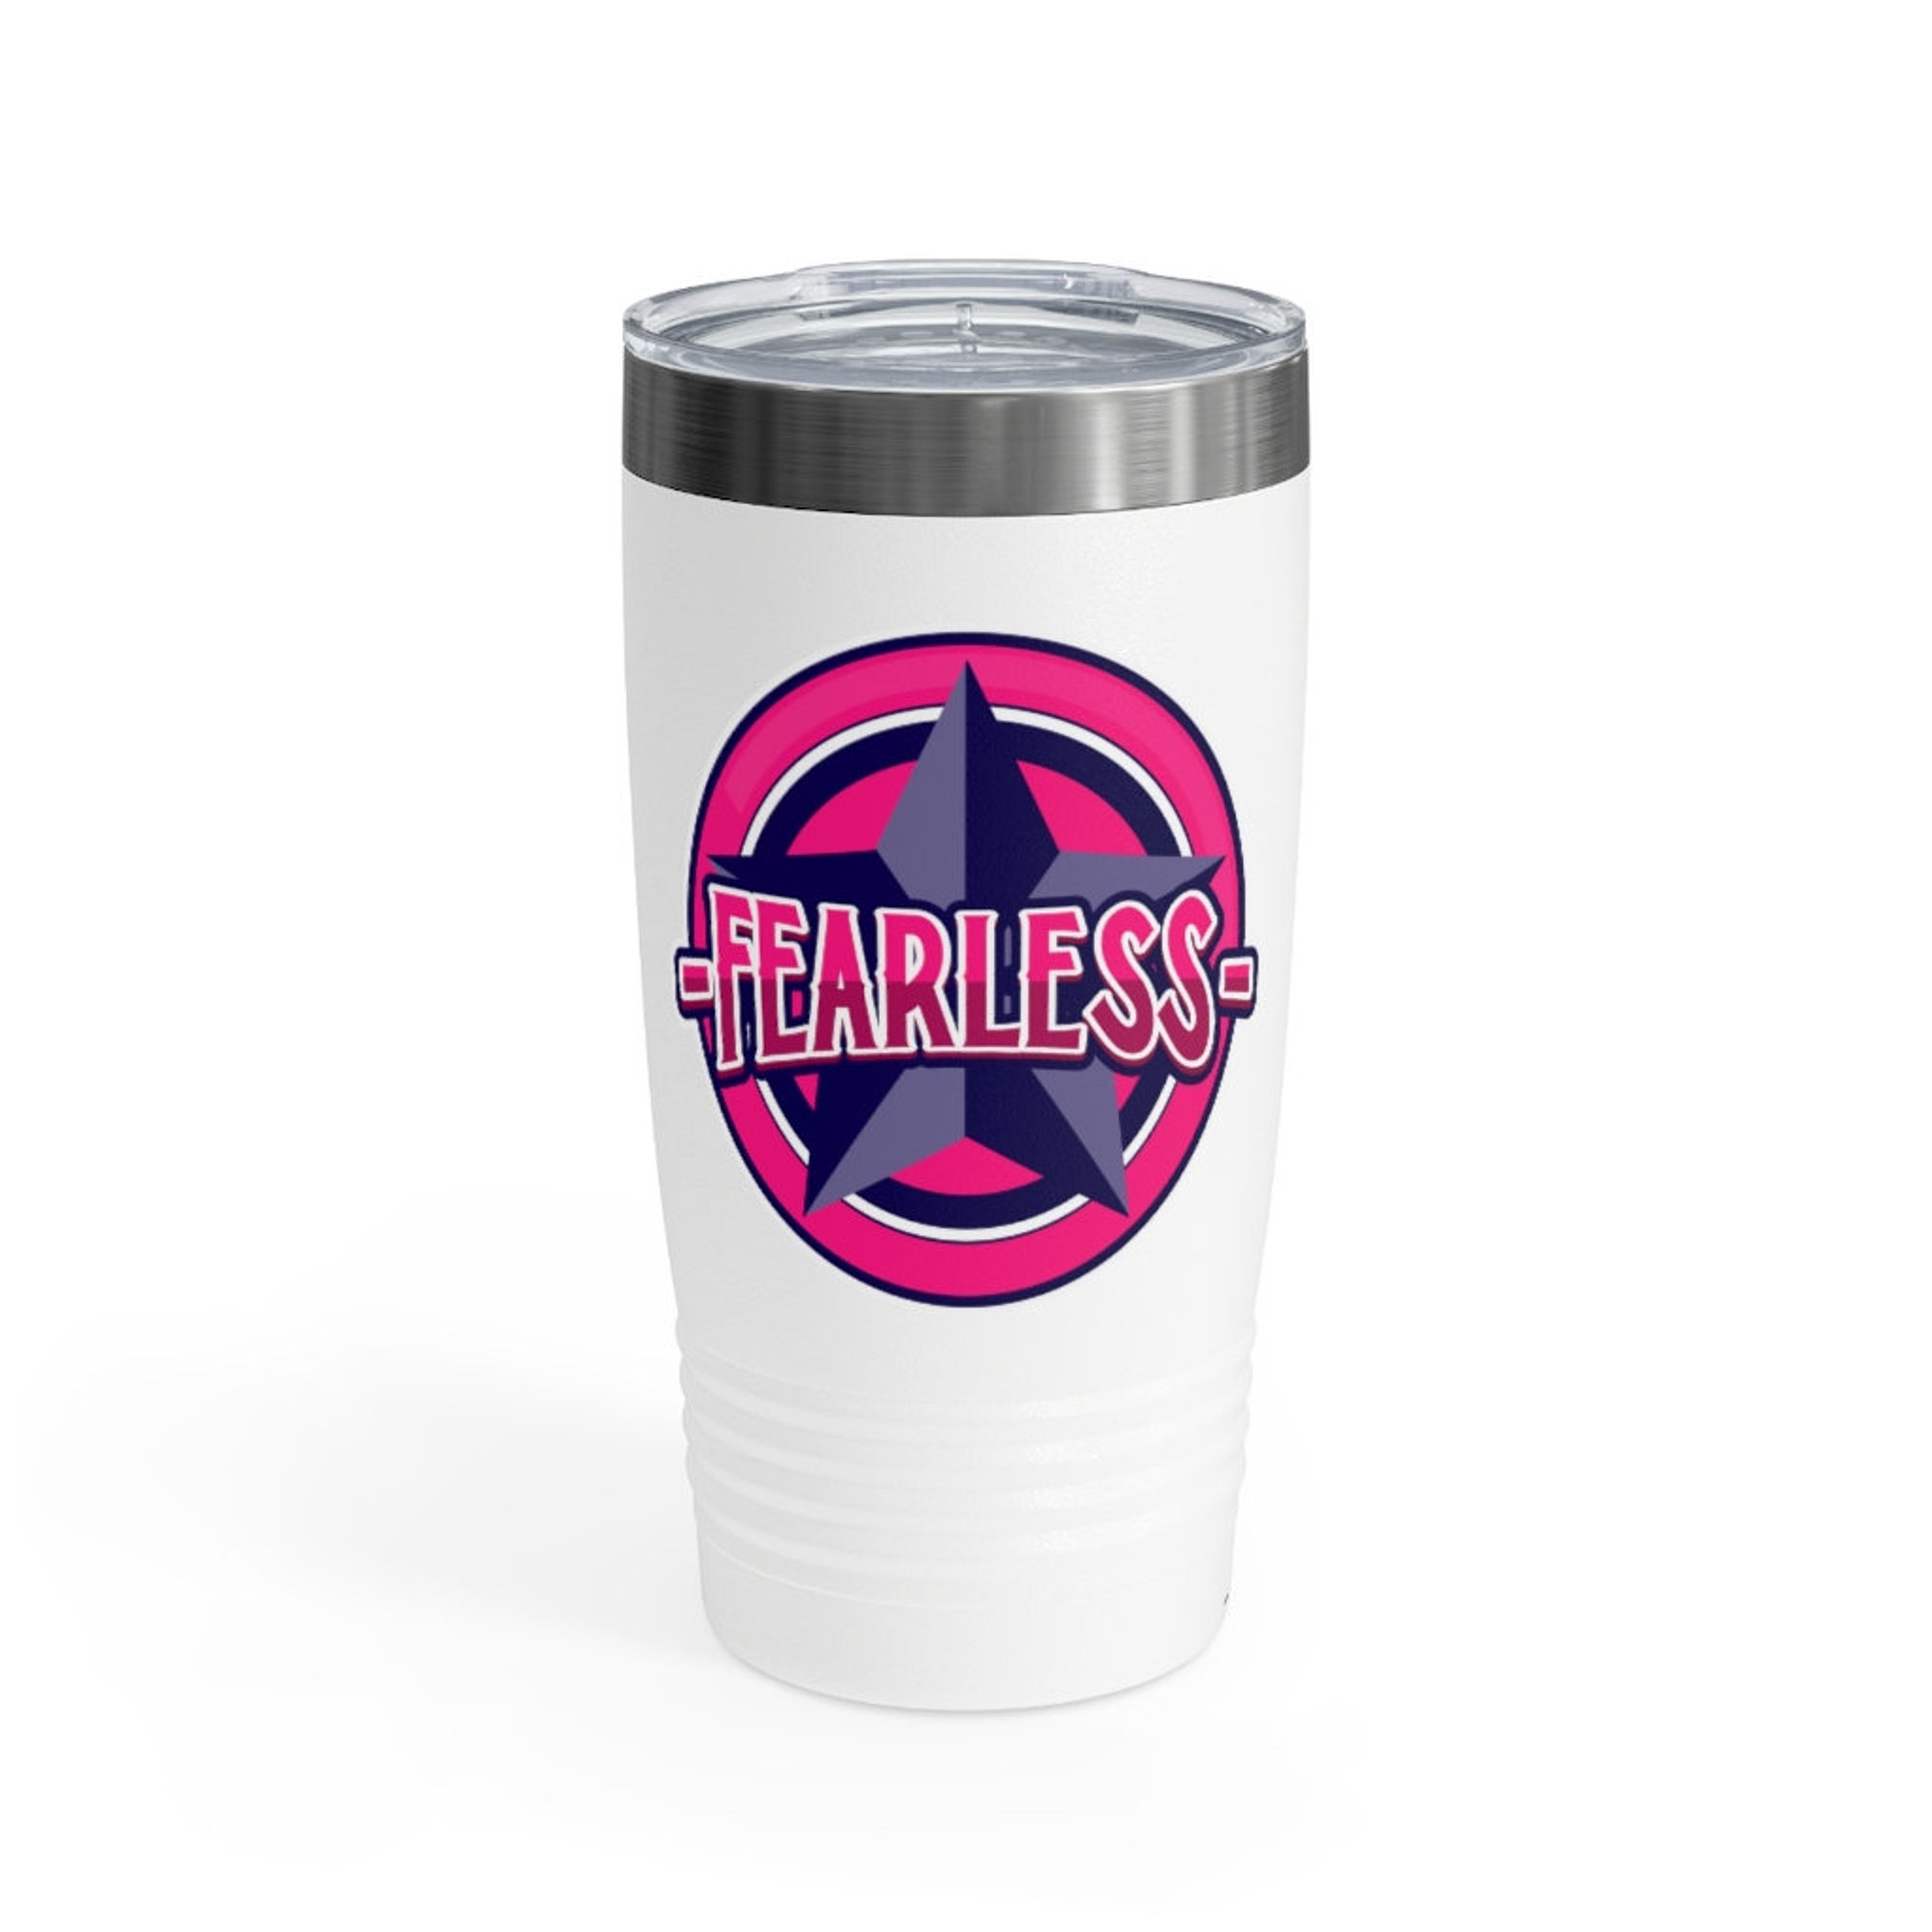 Discover Fearless Ringneck Tumbler, 20oz